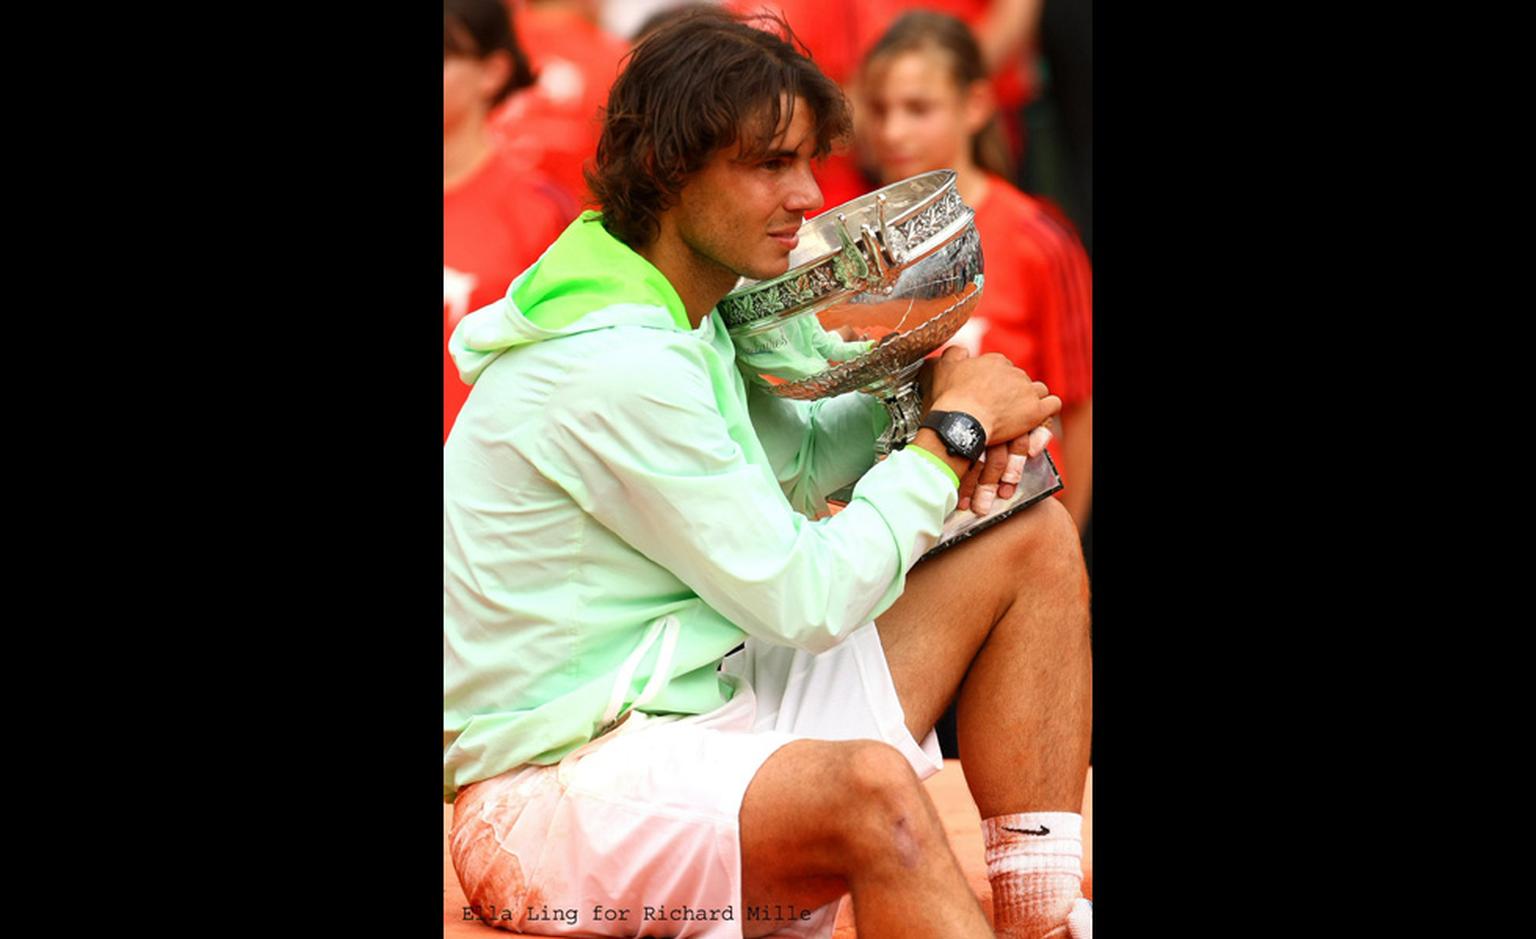 Another stellar moment: Rafael Nadal wins Roland Garros 2010, and yes alongside the trophy is his Richard Mille RM 027 watch.